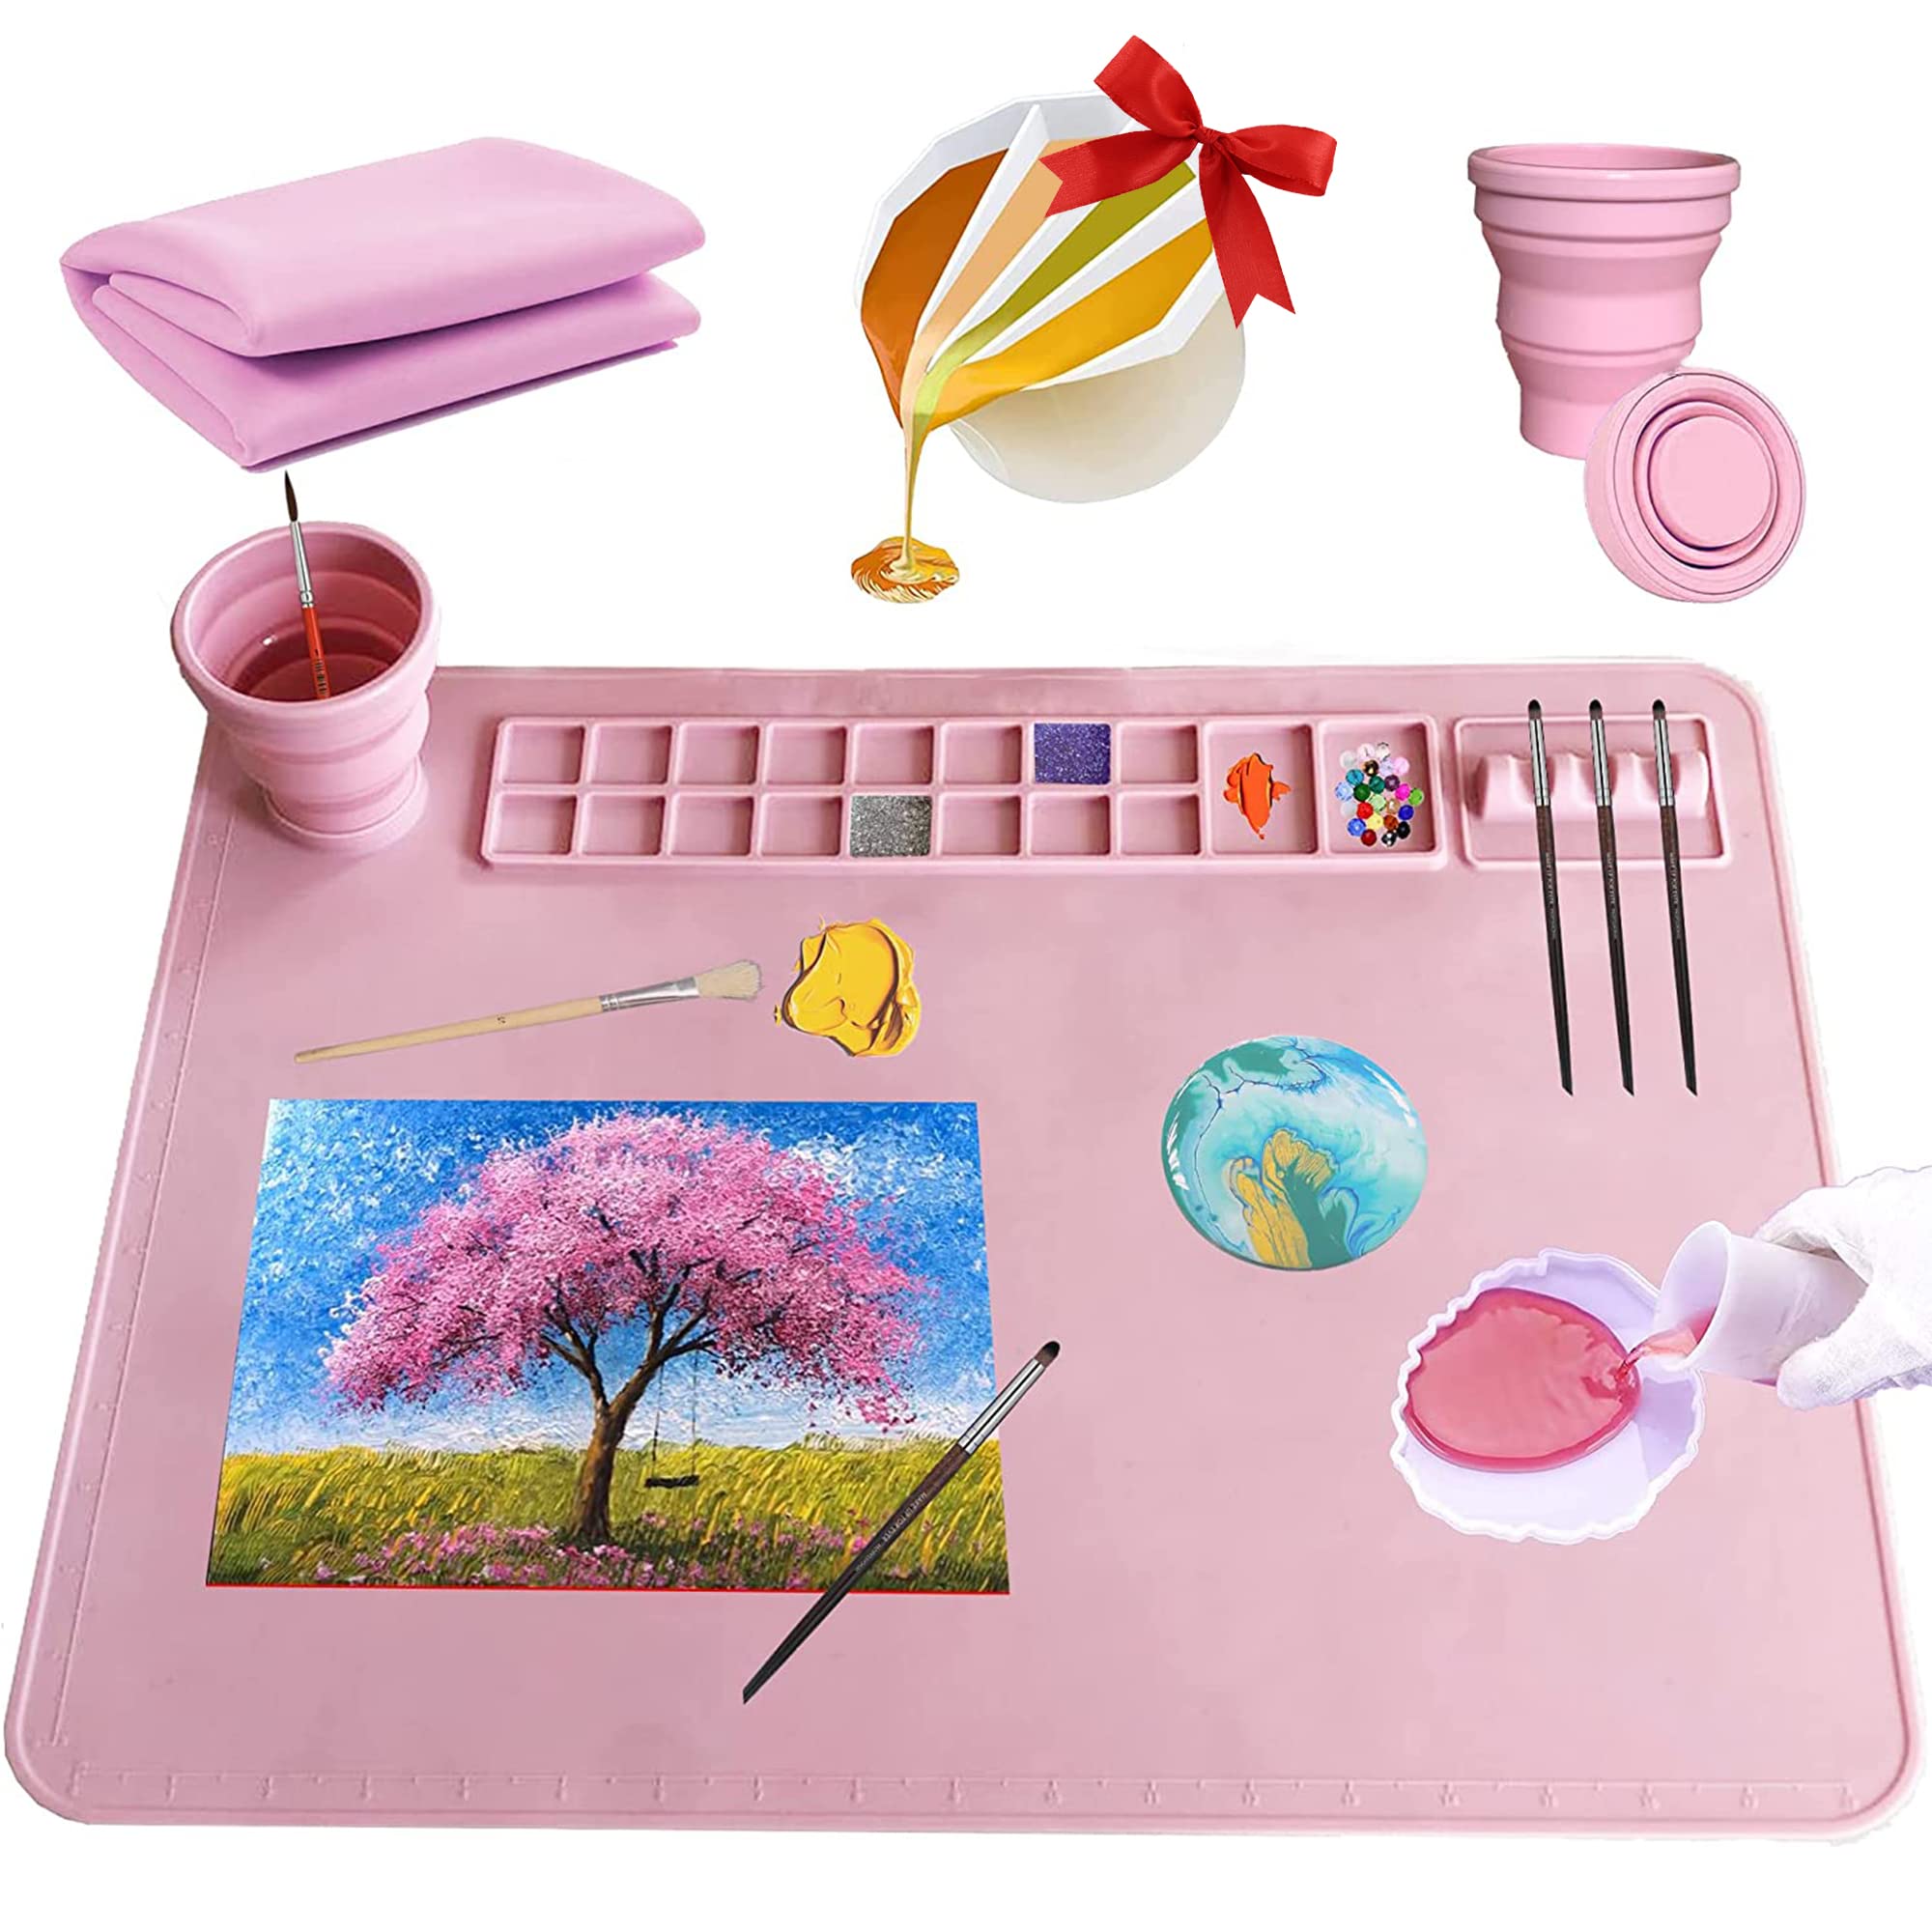 Large Silicone Mats for Crafts - Silicone Painting Mat - Silicone Art Mat  with Cup - Silicone Craft Mats - Painting Supplies - Paint Mat - Washable  and Nonstick Artist Mat (Pink 23.8x15.7 inch)